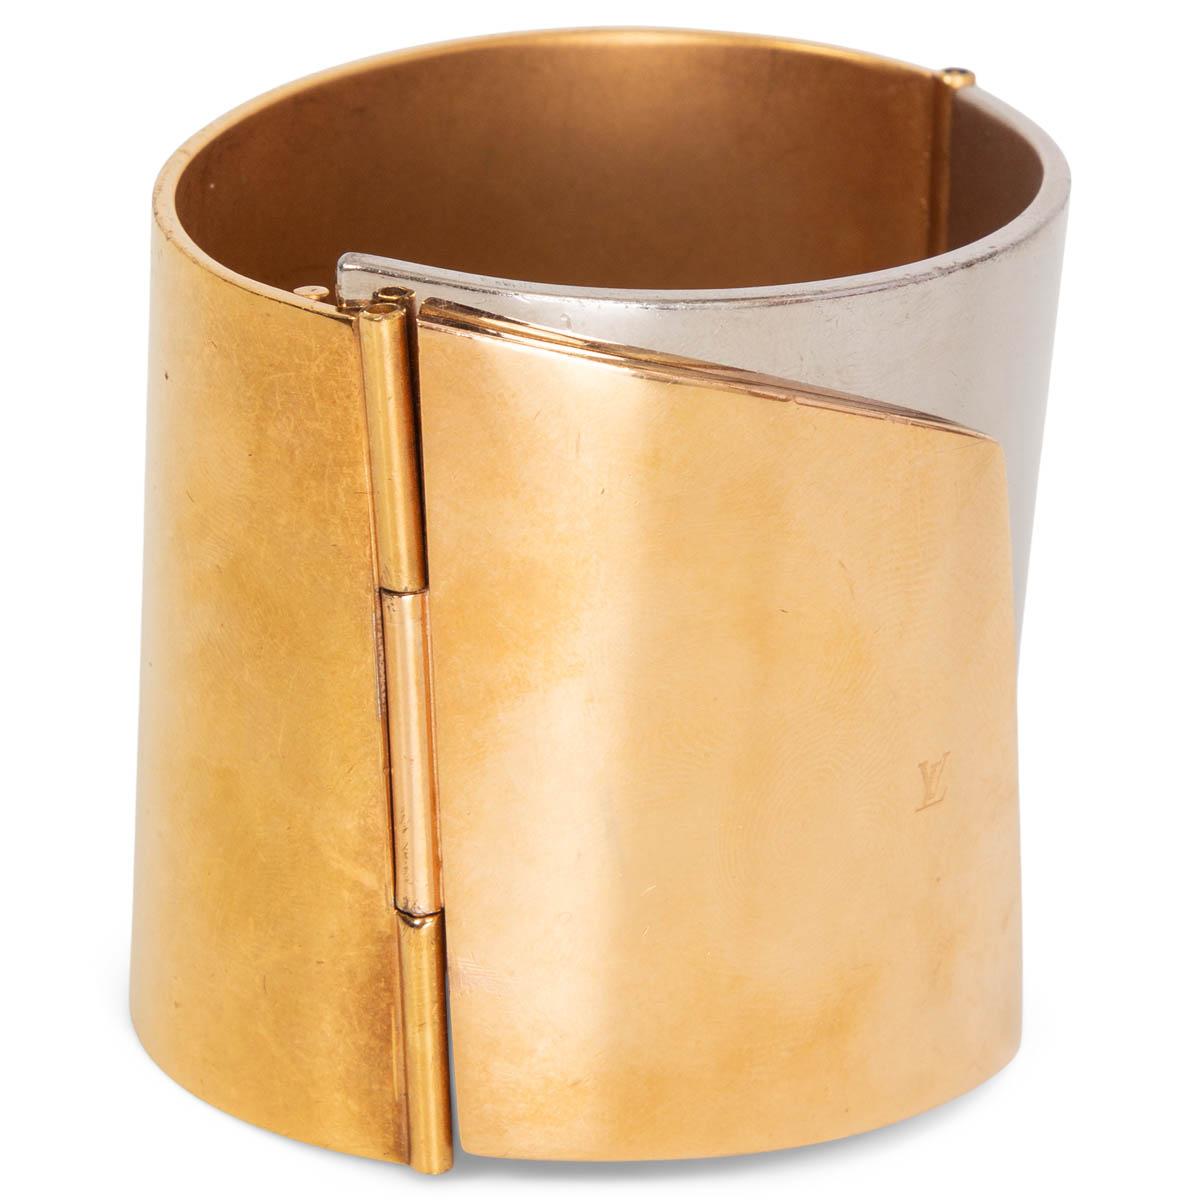 100% authentic Louis Vuitton 'My Epi' cuff in gold and silver-tone metal. Opens with a magnetic closure. Has been worn and shows wear and scratches allover. Overall in good condition. 

Measurements
Height	5cm (2in)
Circumference	15cm